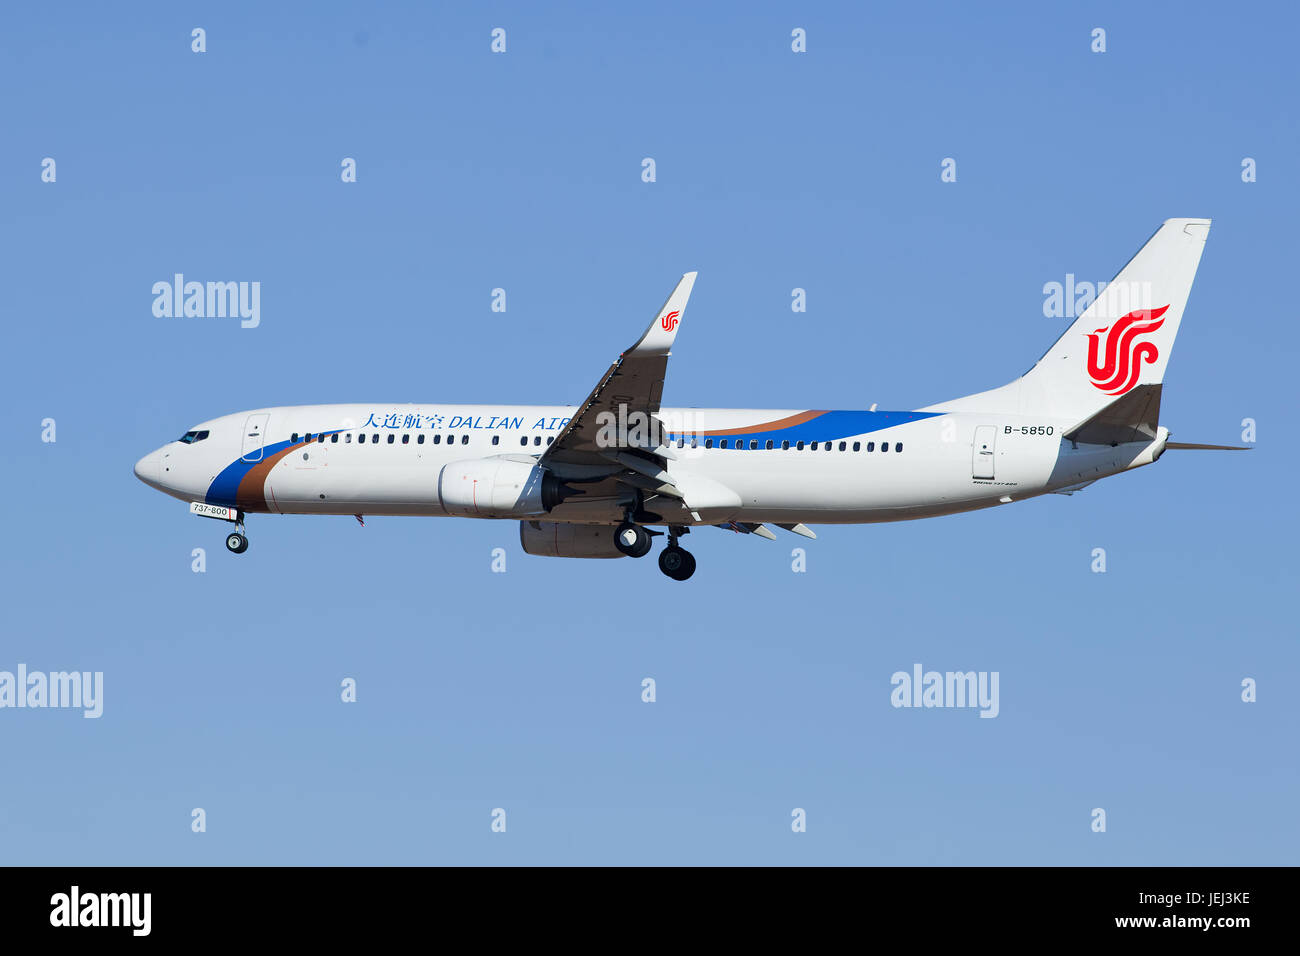 BEIJING-FEBRUARY 18, 2015. Dailan Airlines B-5850, Boeing 737-800 landing. The Boeing 737 is a short- to medium-range twin-engine narrow-body jet. Stock Photo